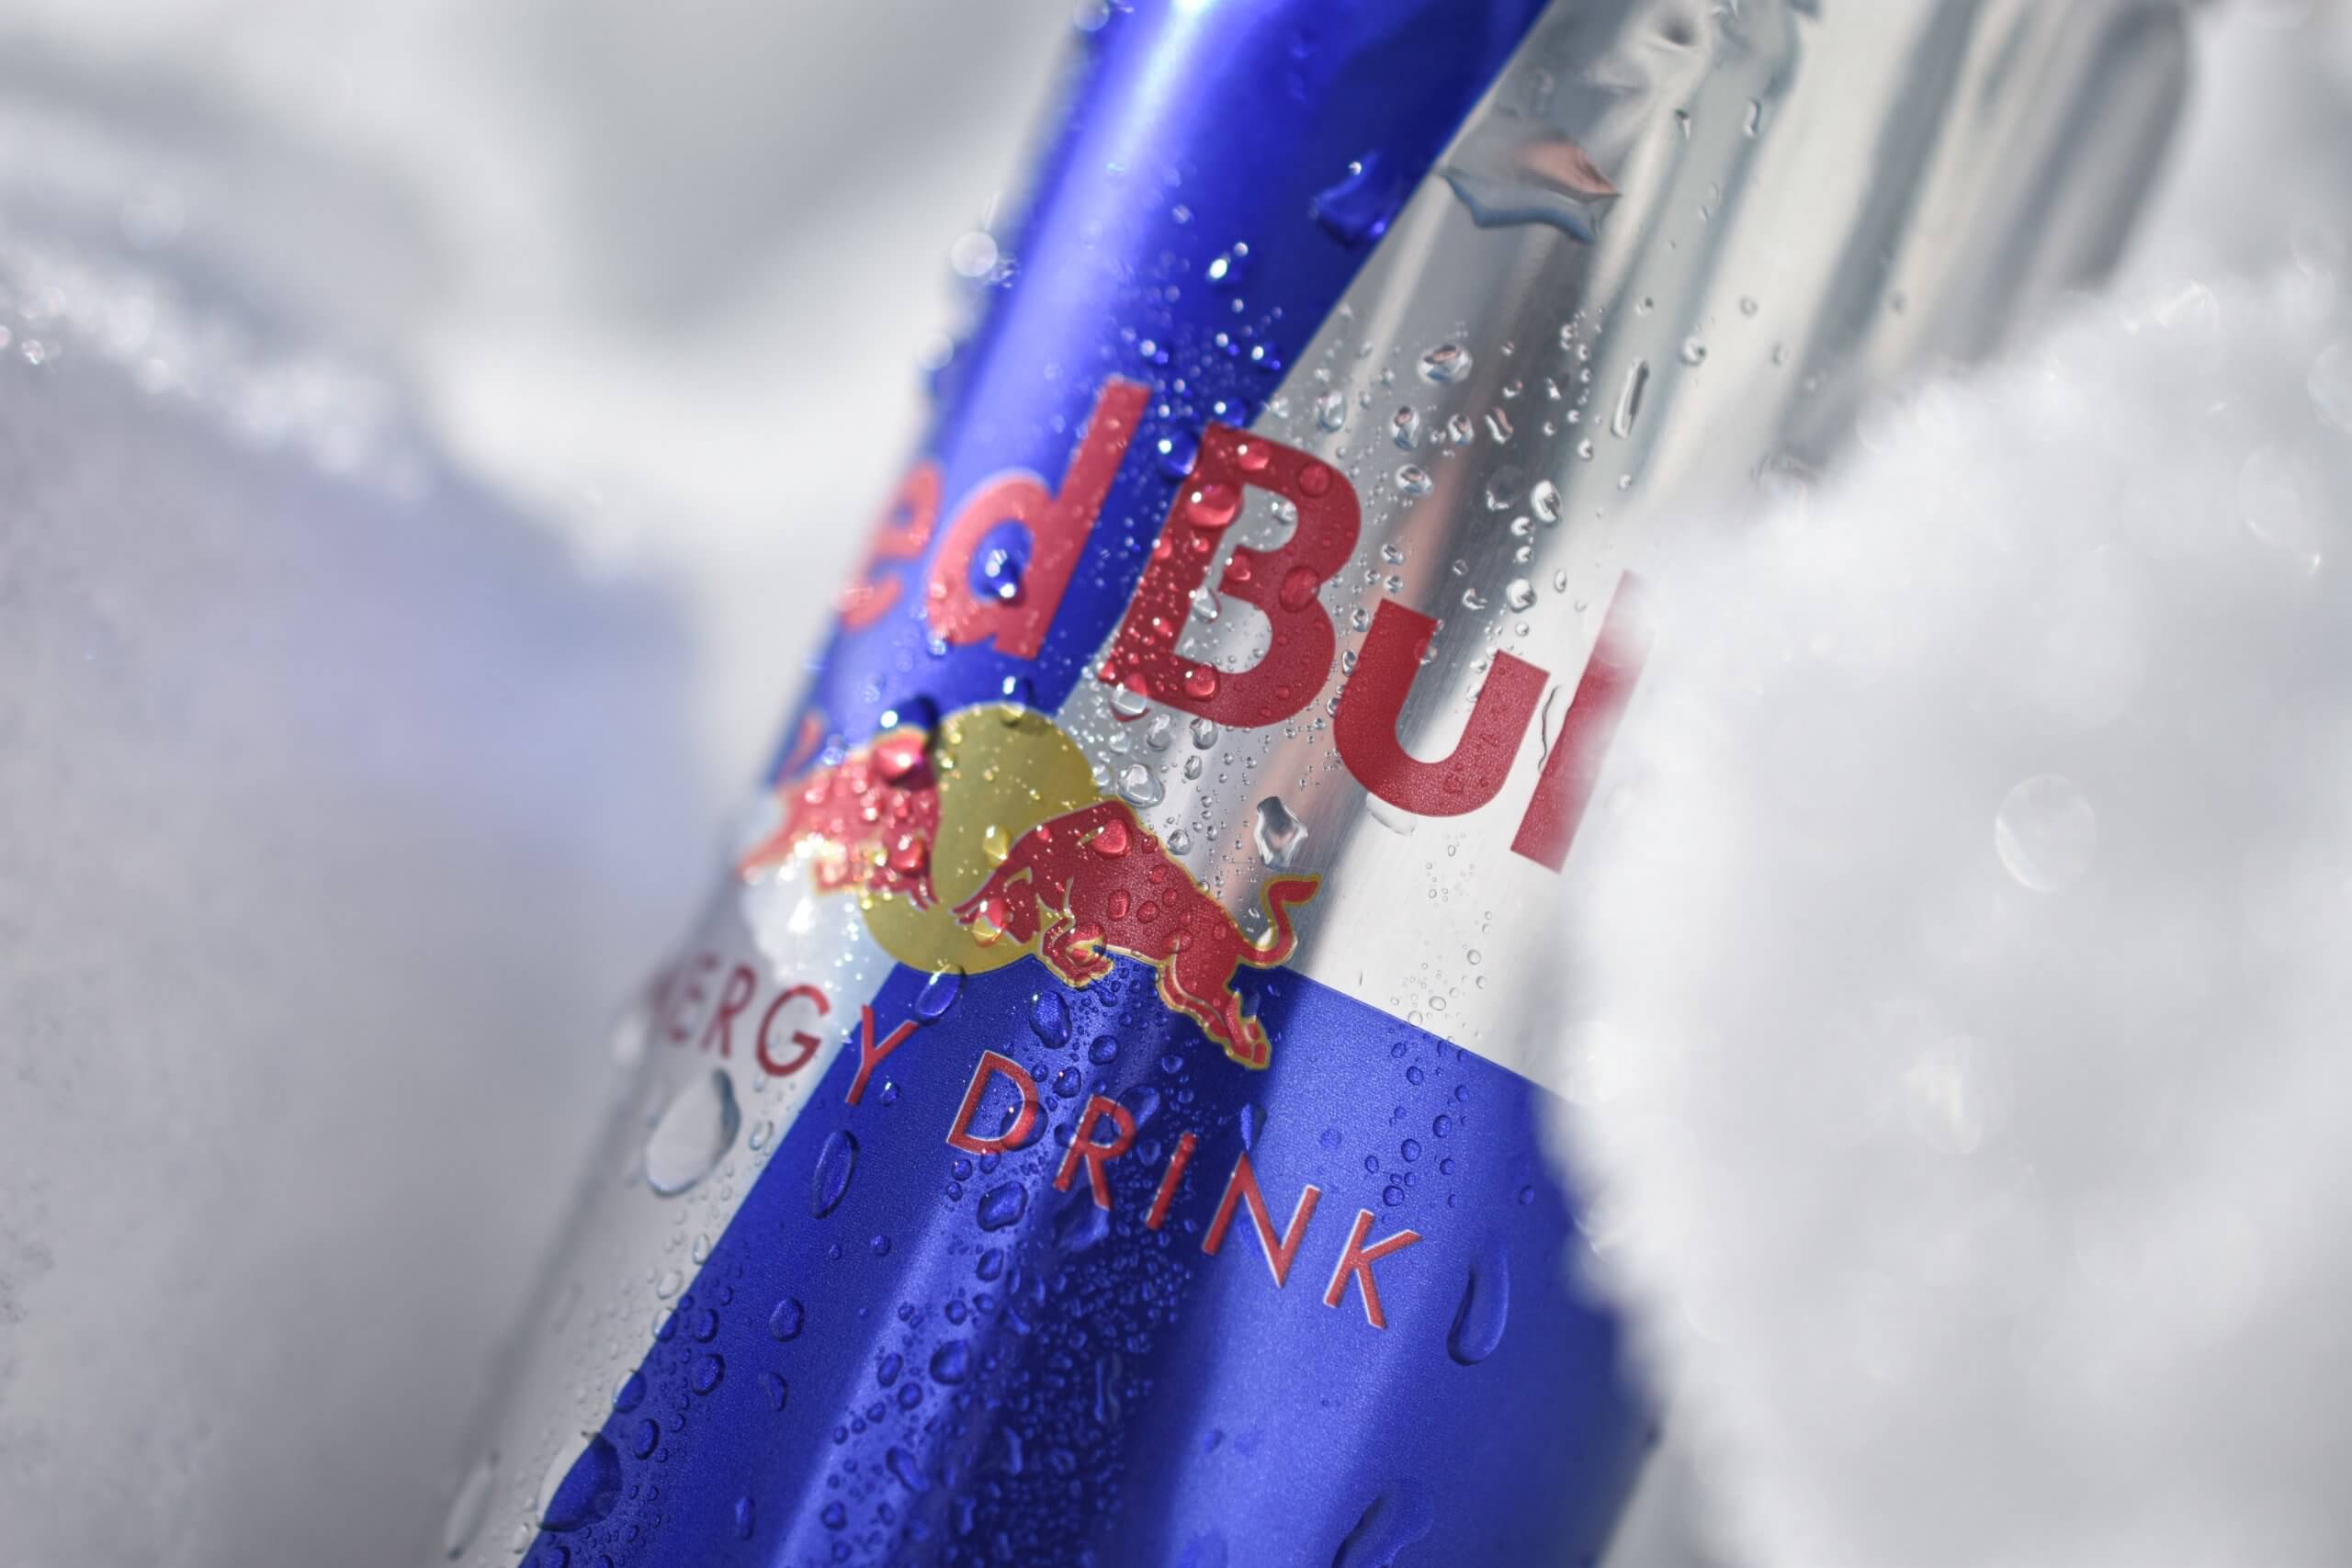 Red Bull Dose